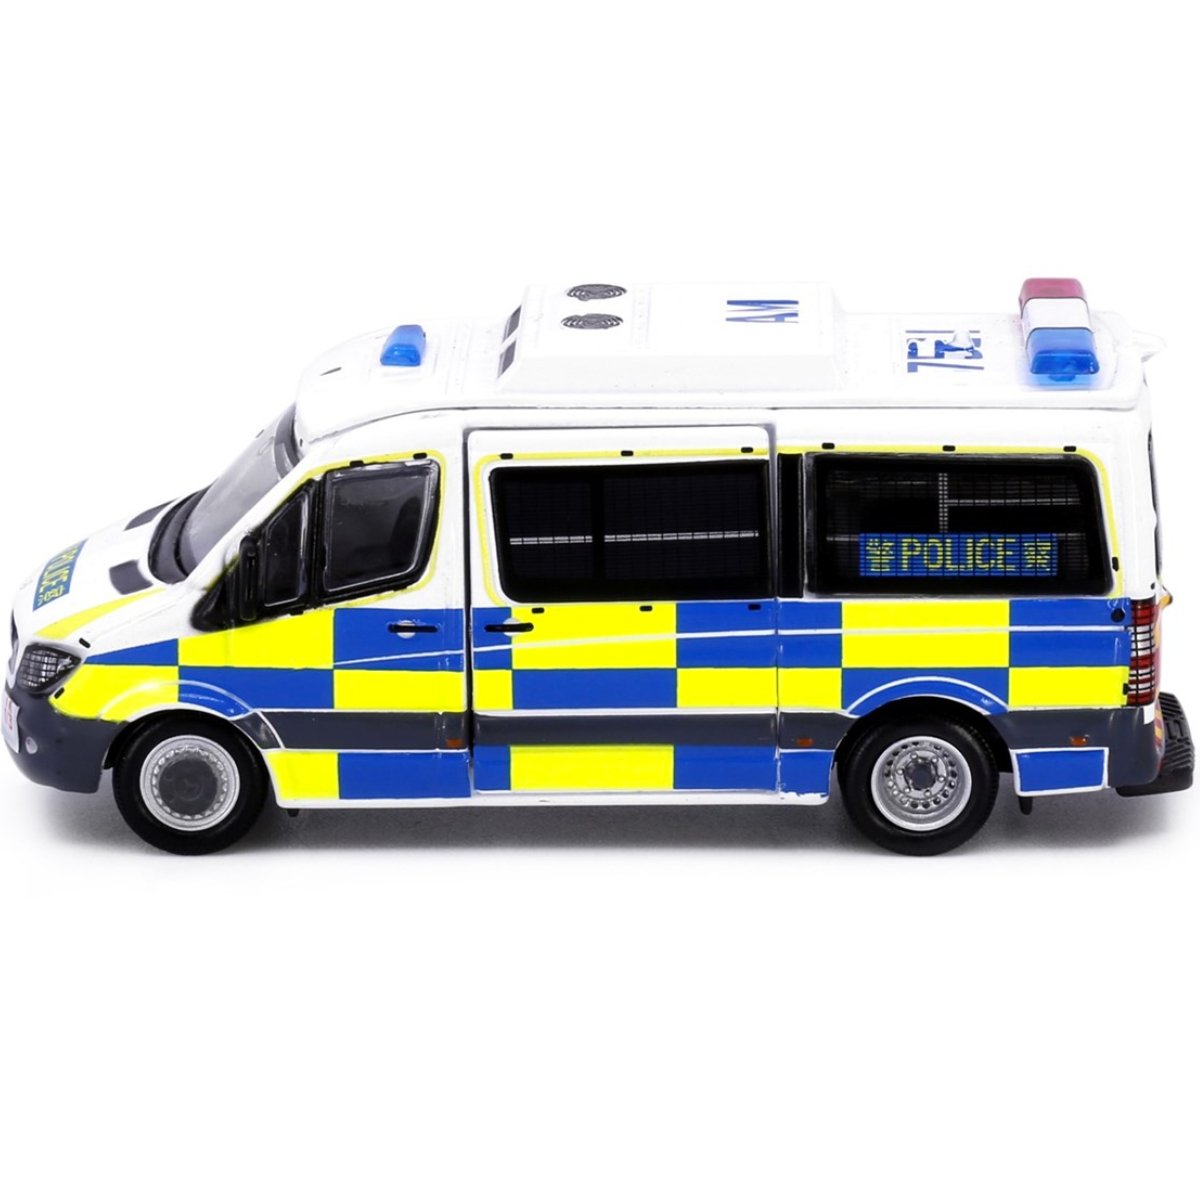 Tiny Models Mercedes Benz Sprinter Police Traffic AM7521 (1:76 Scale) - Phillips Hobbies